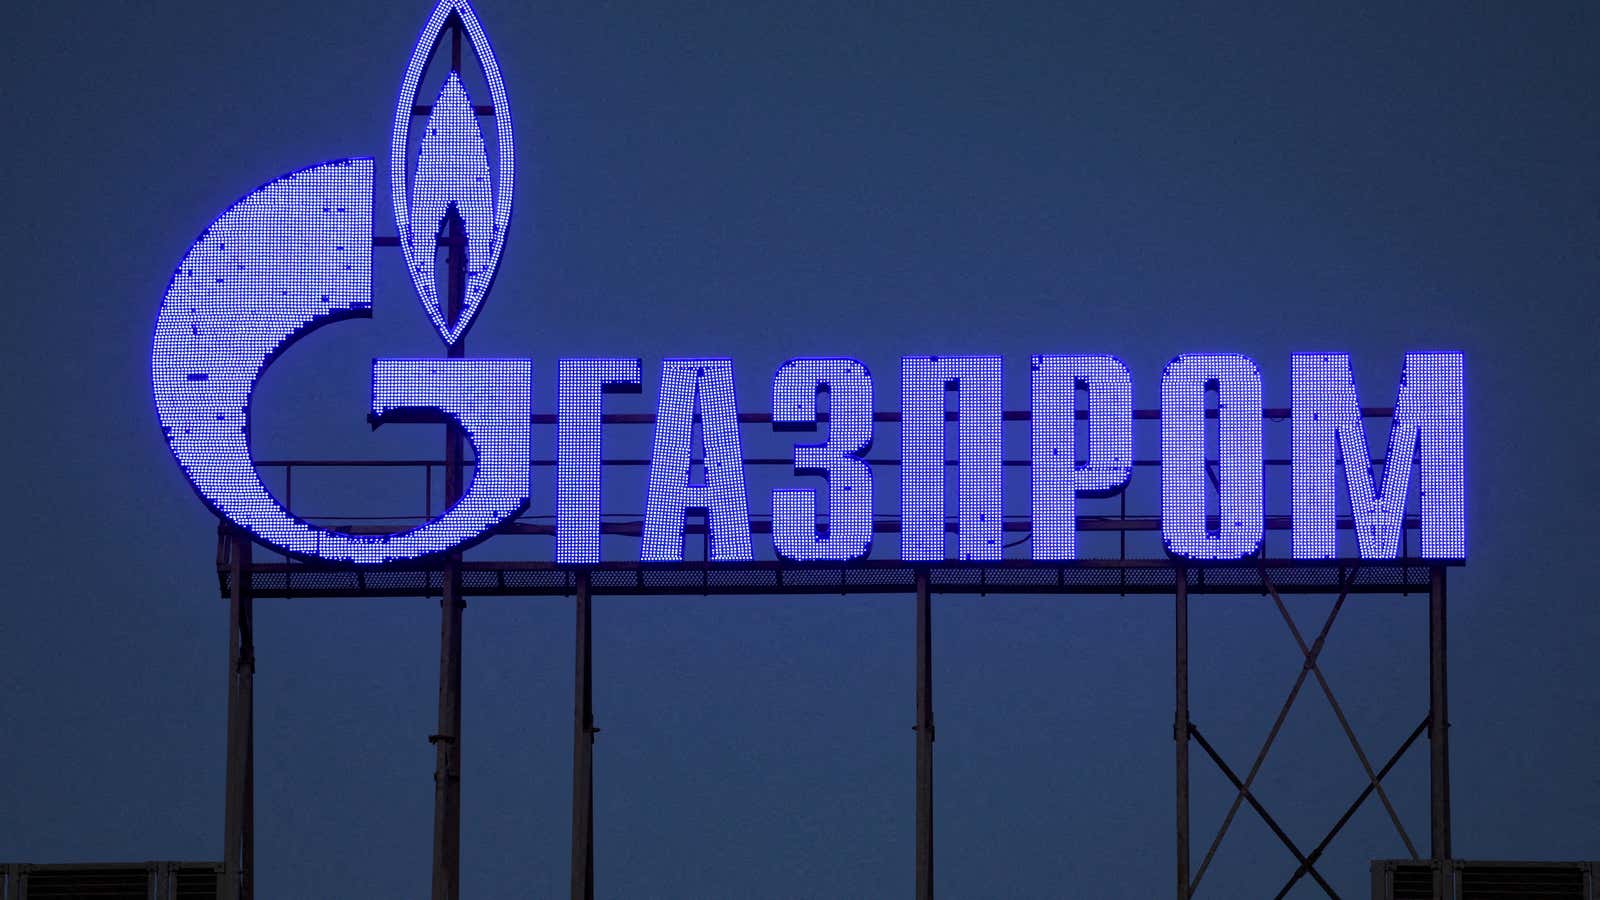 The logo of Gazprom is seen on the facade of a business centre in Saint Petersburg, Russia, March 31, 2022.